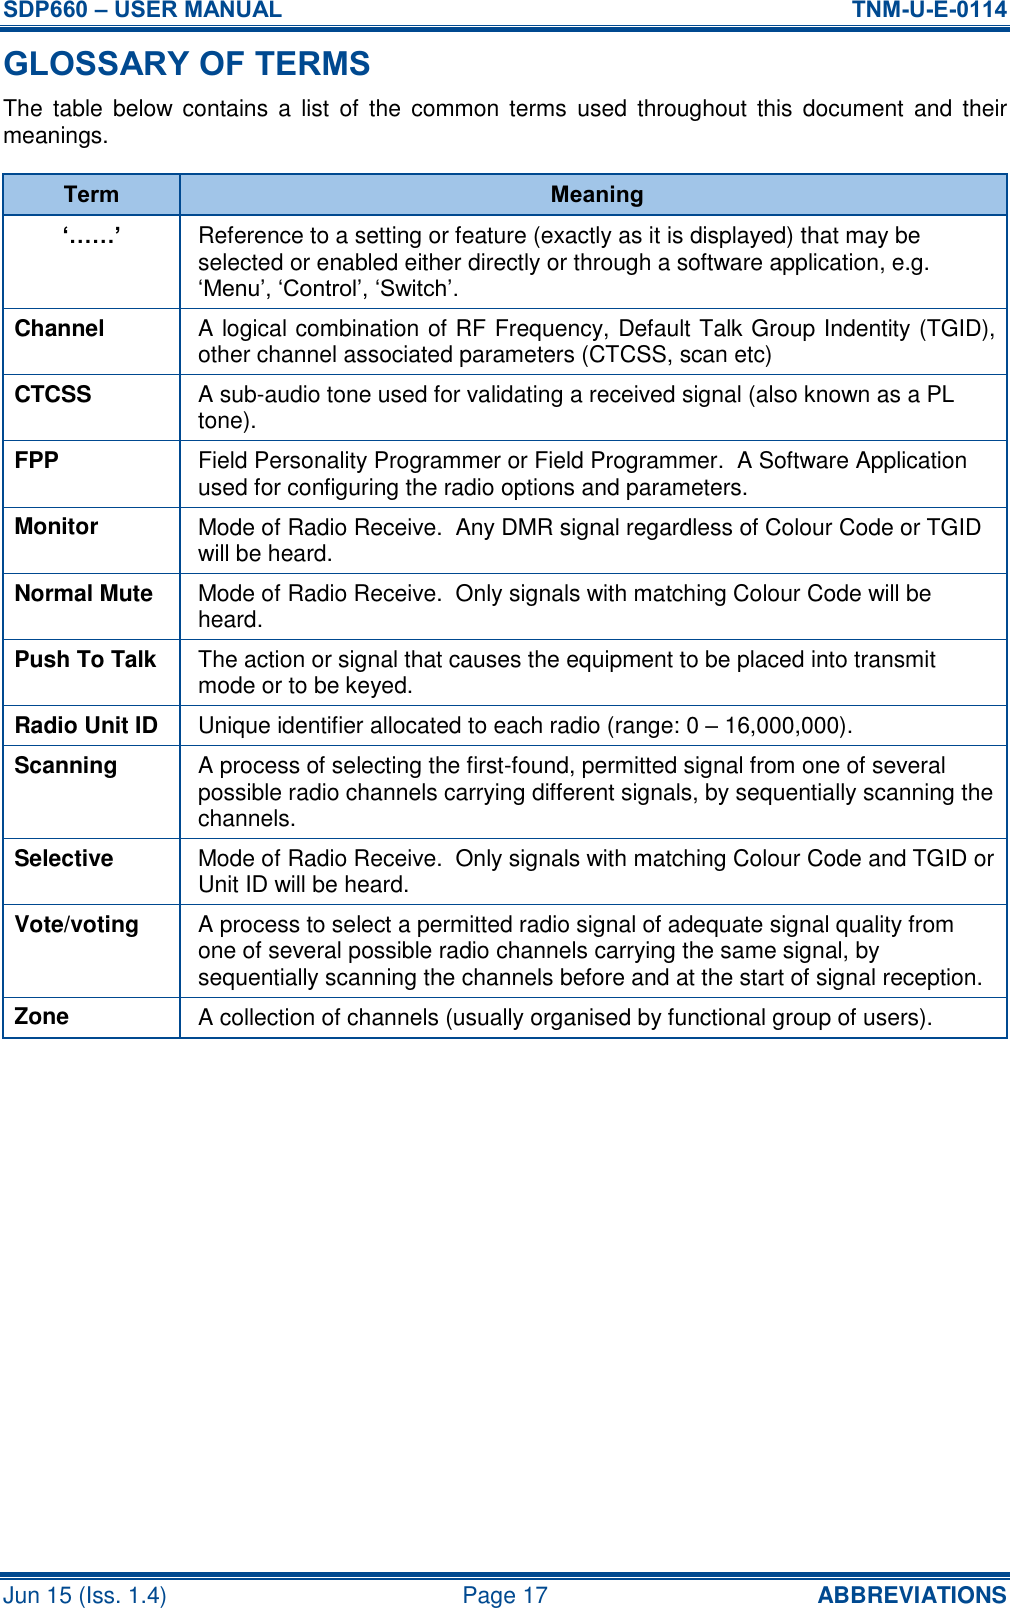 SDP660 – USER MANUAL  TNM-U-E-0114 Jun 15 (Iss. 1.4)  Page 17 ABBREVIATIONS GLOSSARY OF TERMS The  table  below contains  a  list  of  the  common  terms  used  throughout this  document  and  their meanings. Term Meaning ‘……’ Reference to a setting or feature (exactly as it is displayed) that may be selected or enabled either directly or through a software application, e.g. ‘Menu’, ‘Control’, ‘Switch’. Channel A logical combination of RF Frequency, Default Talk Group Indentity (TGID), other channel associated parameters (CTCSS, scan etc) CTCSS A sub-audio tone used for validating a received signal (also known as a PL tone). FPP Field Personality Programmer or Field Programmer.  A Software Application used for configuring the radio options and parameters. Monitor Mode of Radio Receive.  Any DMR signal regardless of Colour Code or TGID will be heard. Normal Mute Mode of Radio Receive.  Only signals with matching Colour Code will be heard. Push To Talk The action or signal that causes the equipment to be placed into transmit mode or to be keyed. Radio Unit ID Unique identifier allocated to each radio (range: 0 – 16,000,000). Scanning A process of selecting the first-found, permitted signal from one of several possible radio channels carrying different signals, by sequentially scanning the channels. Selective Mode of Radio Receive.  Only signals with matching Colour Code and TGID or Unit ID will be heard. Vote/voting A process to select a permitted radio signal of adequate signal quality from one of several possible radio channels carrying the same signal, by sequentially scanning the channels before and at the start of signal reception. Zone A collection of channels (usually organised by functional group of users).     